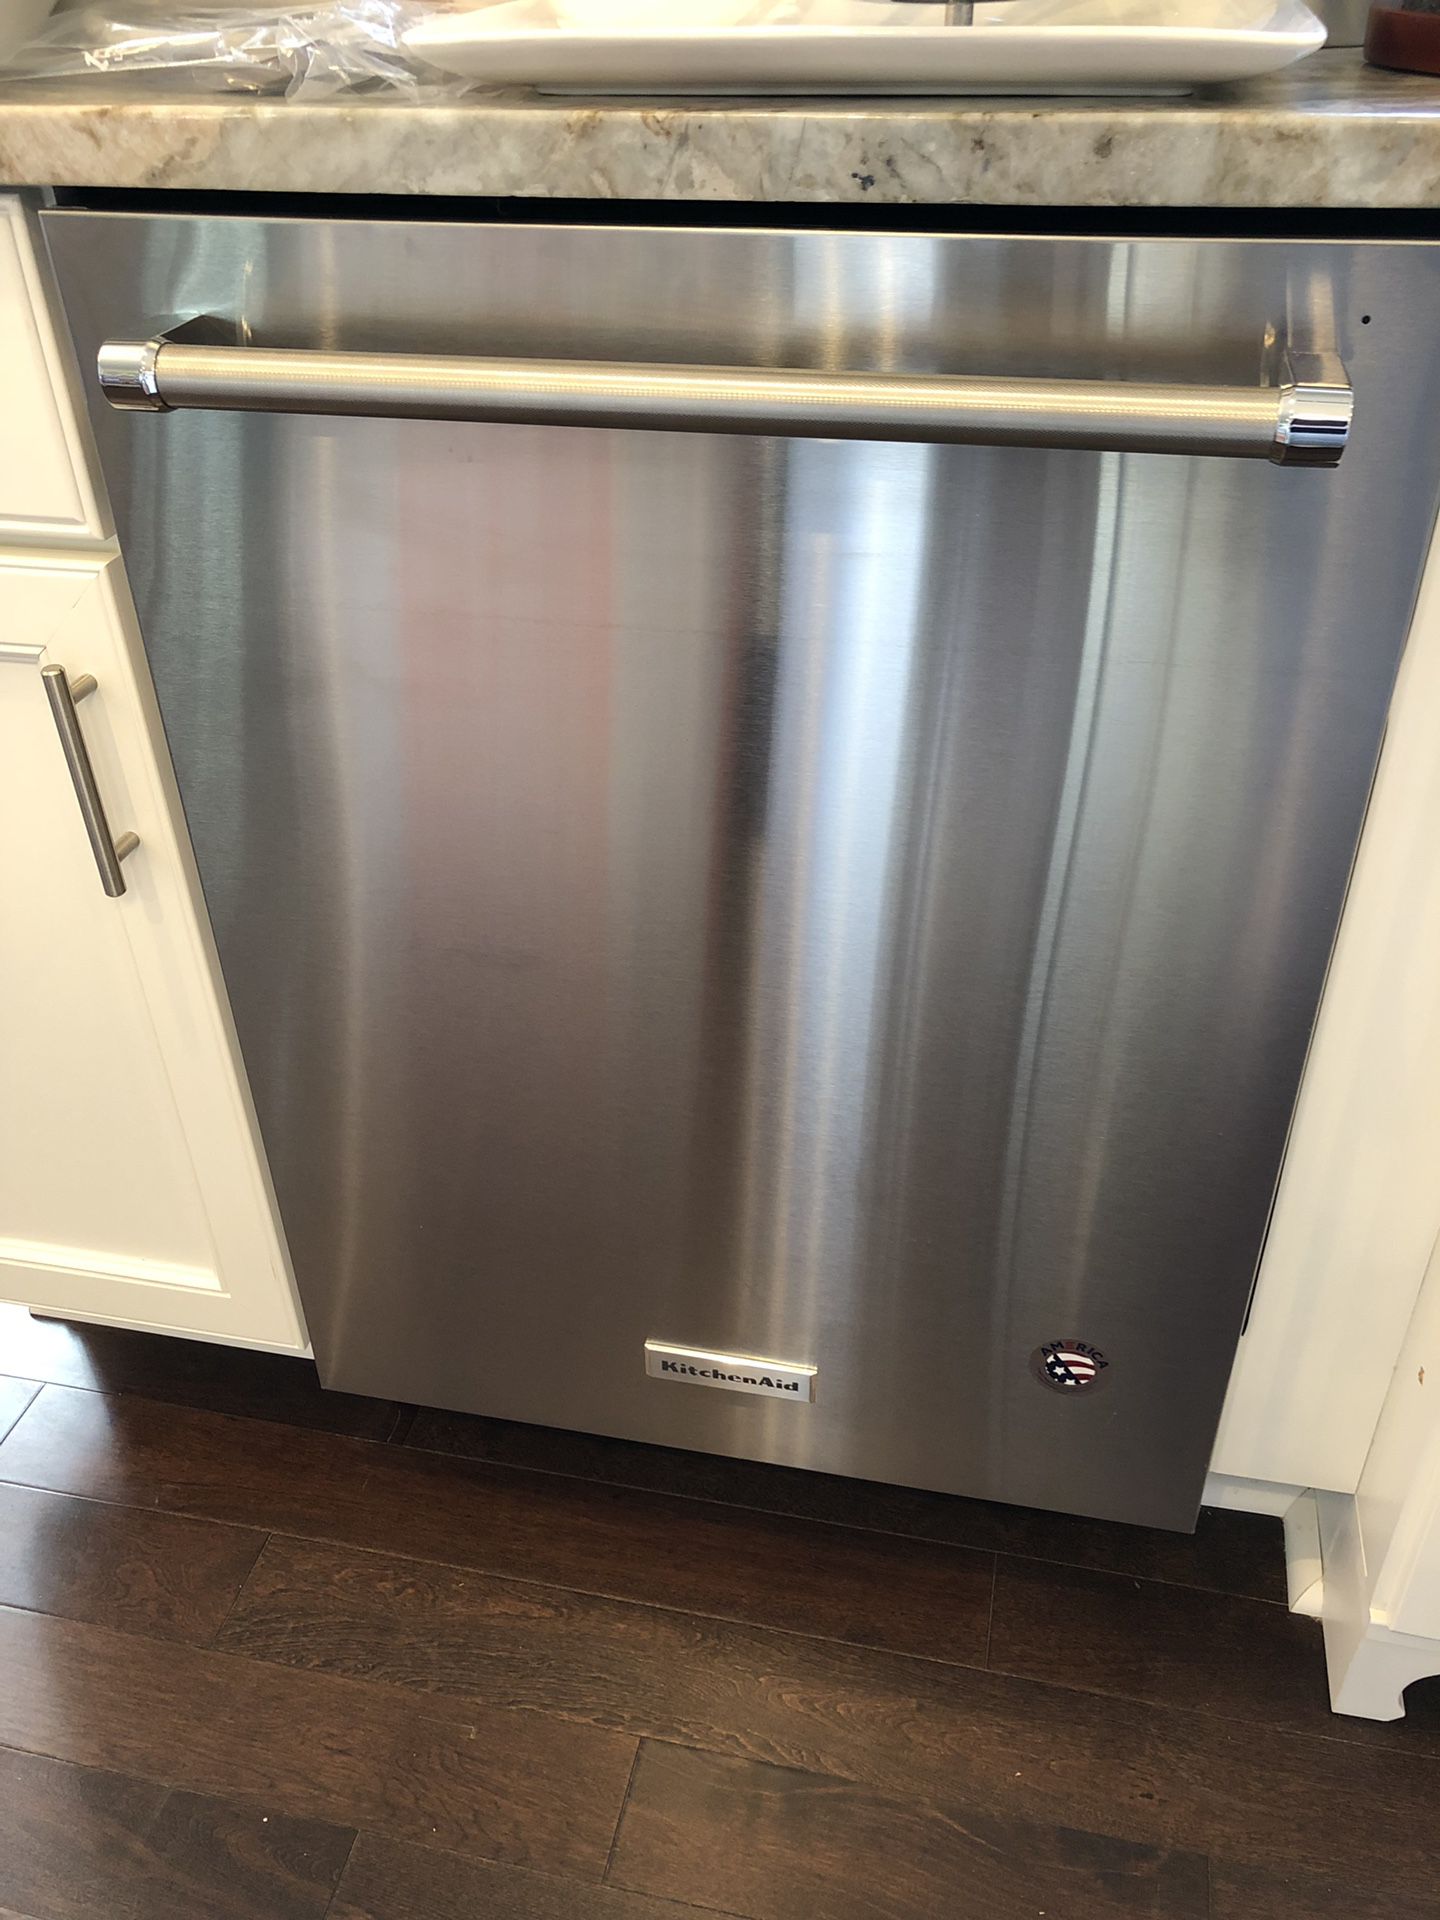 Brand NEW KitchenAid 24” Stainless Steel 44 dBA Dishwasher with Clean Water Wash System